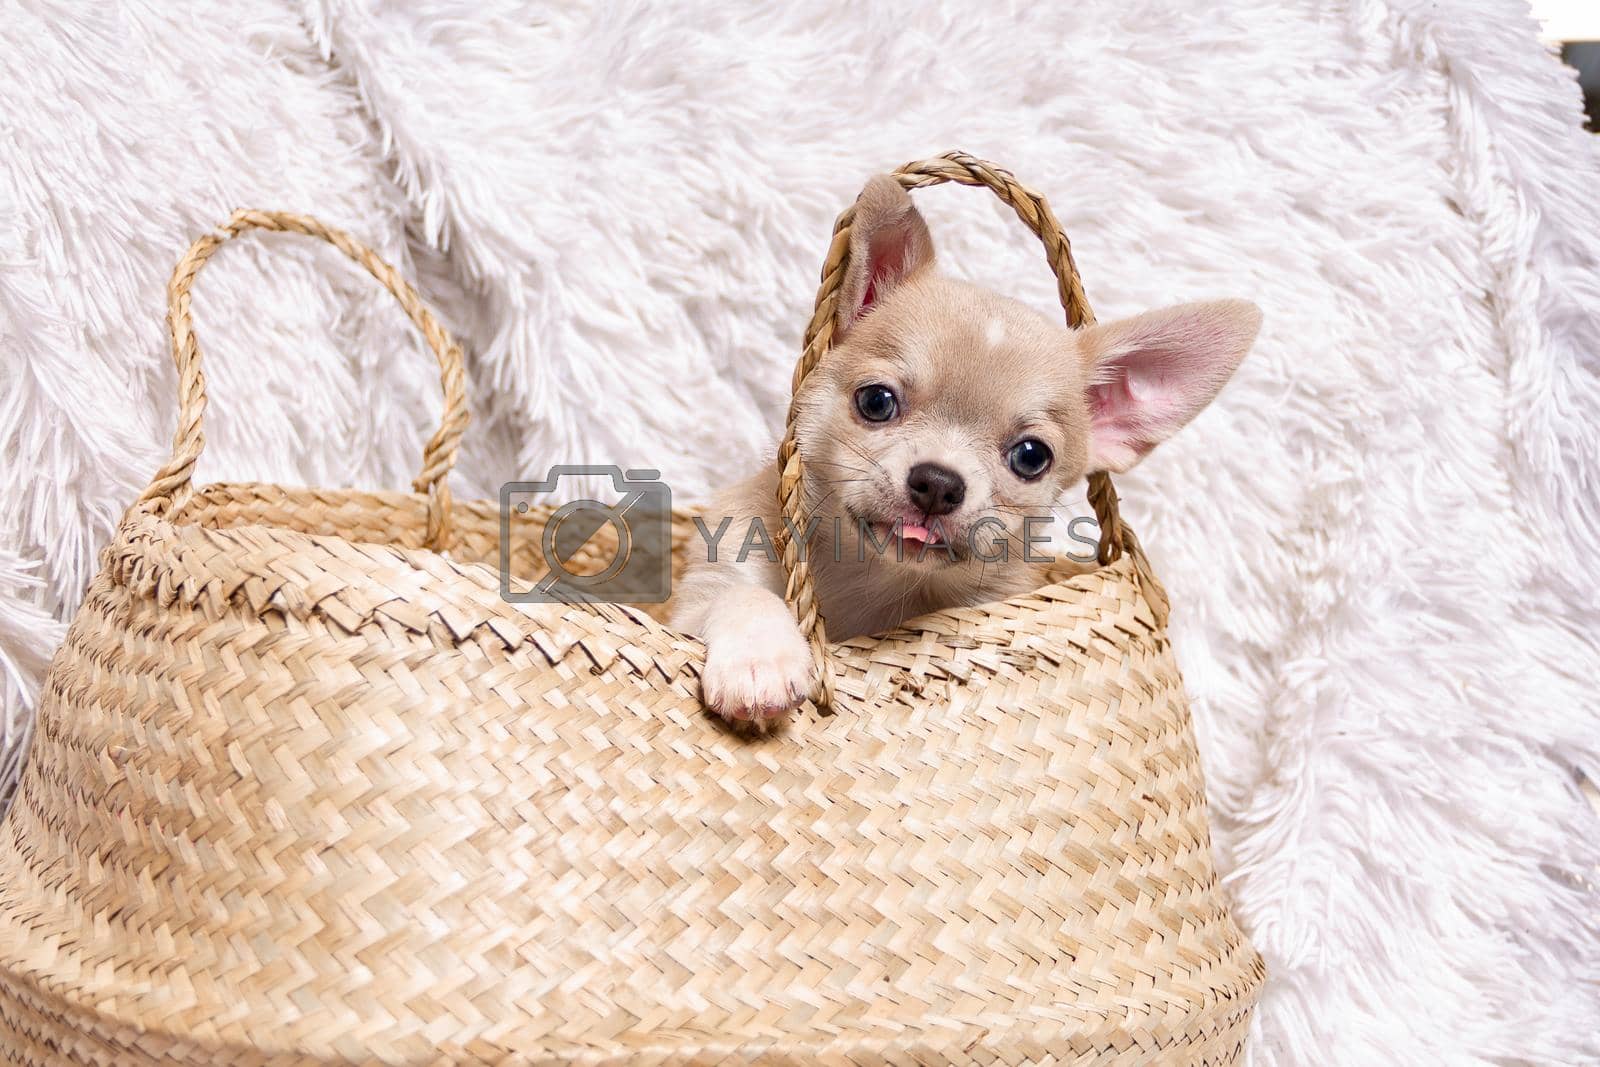 Royalty free image of chihuahua puppy In Wicker basket by Ostanina